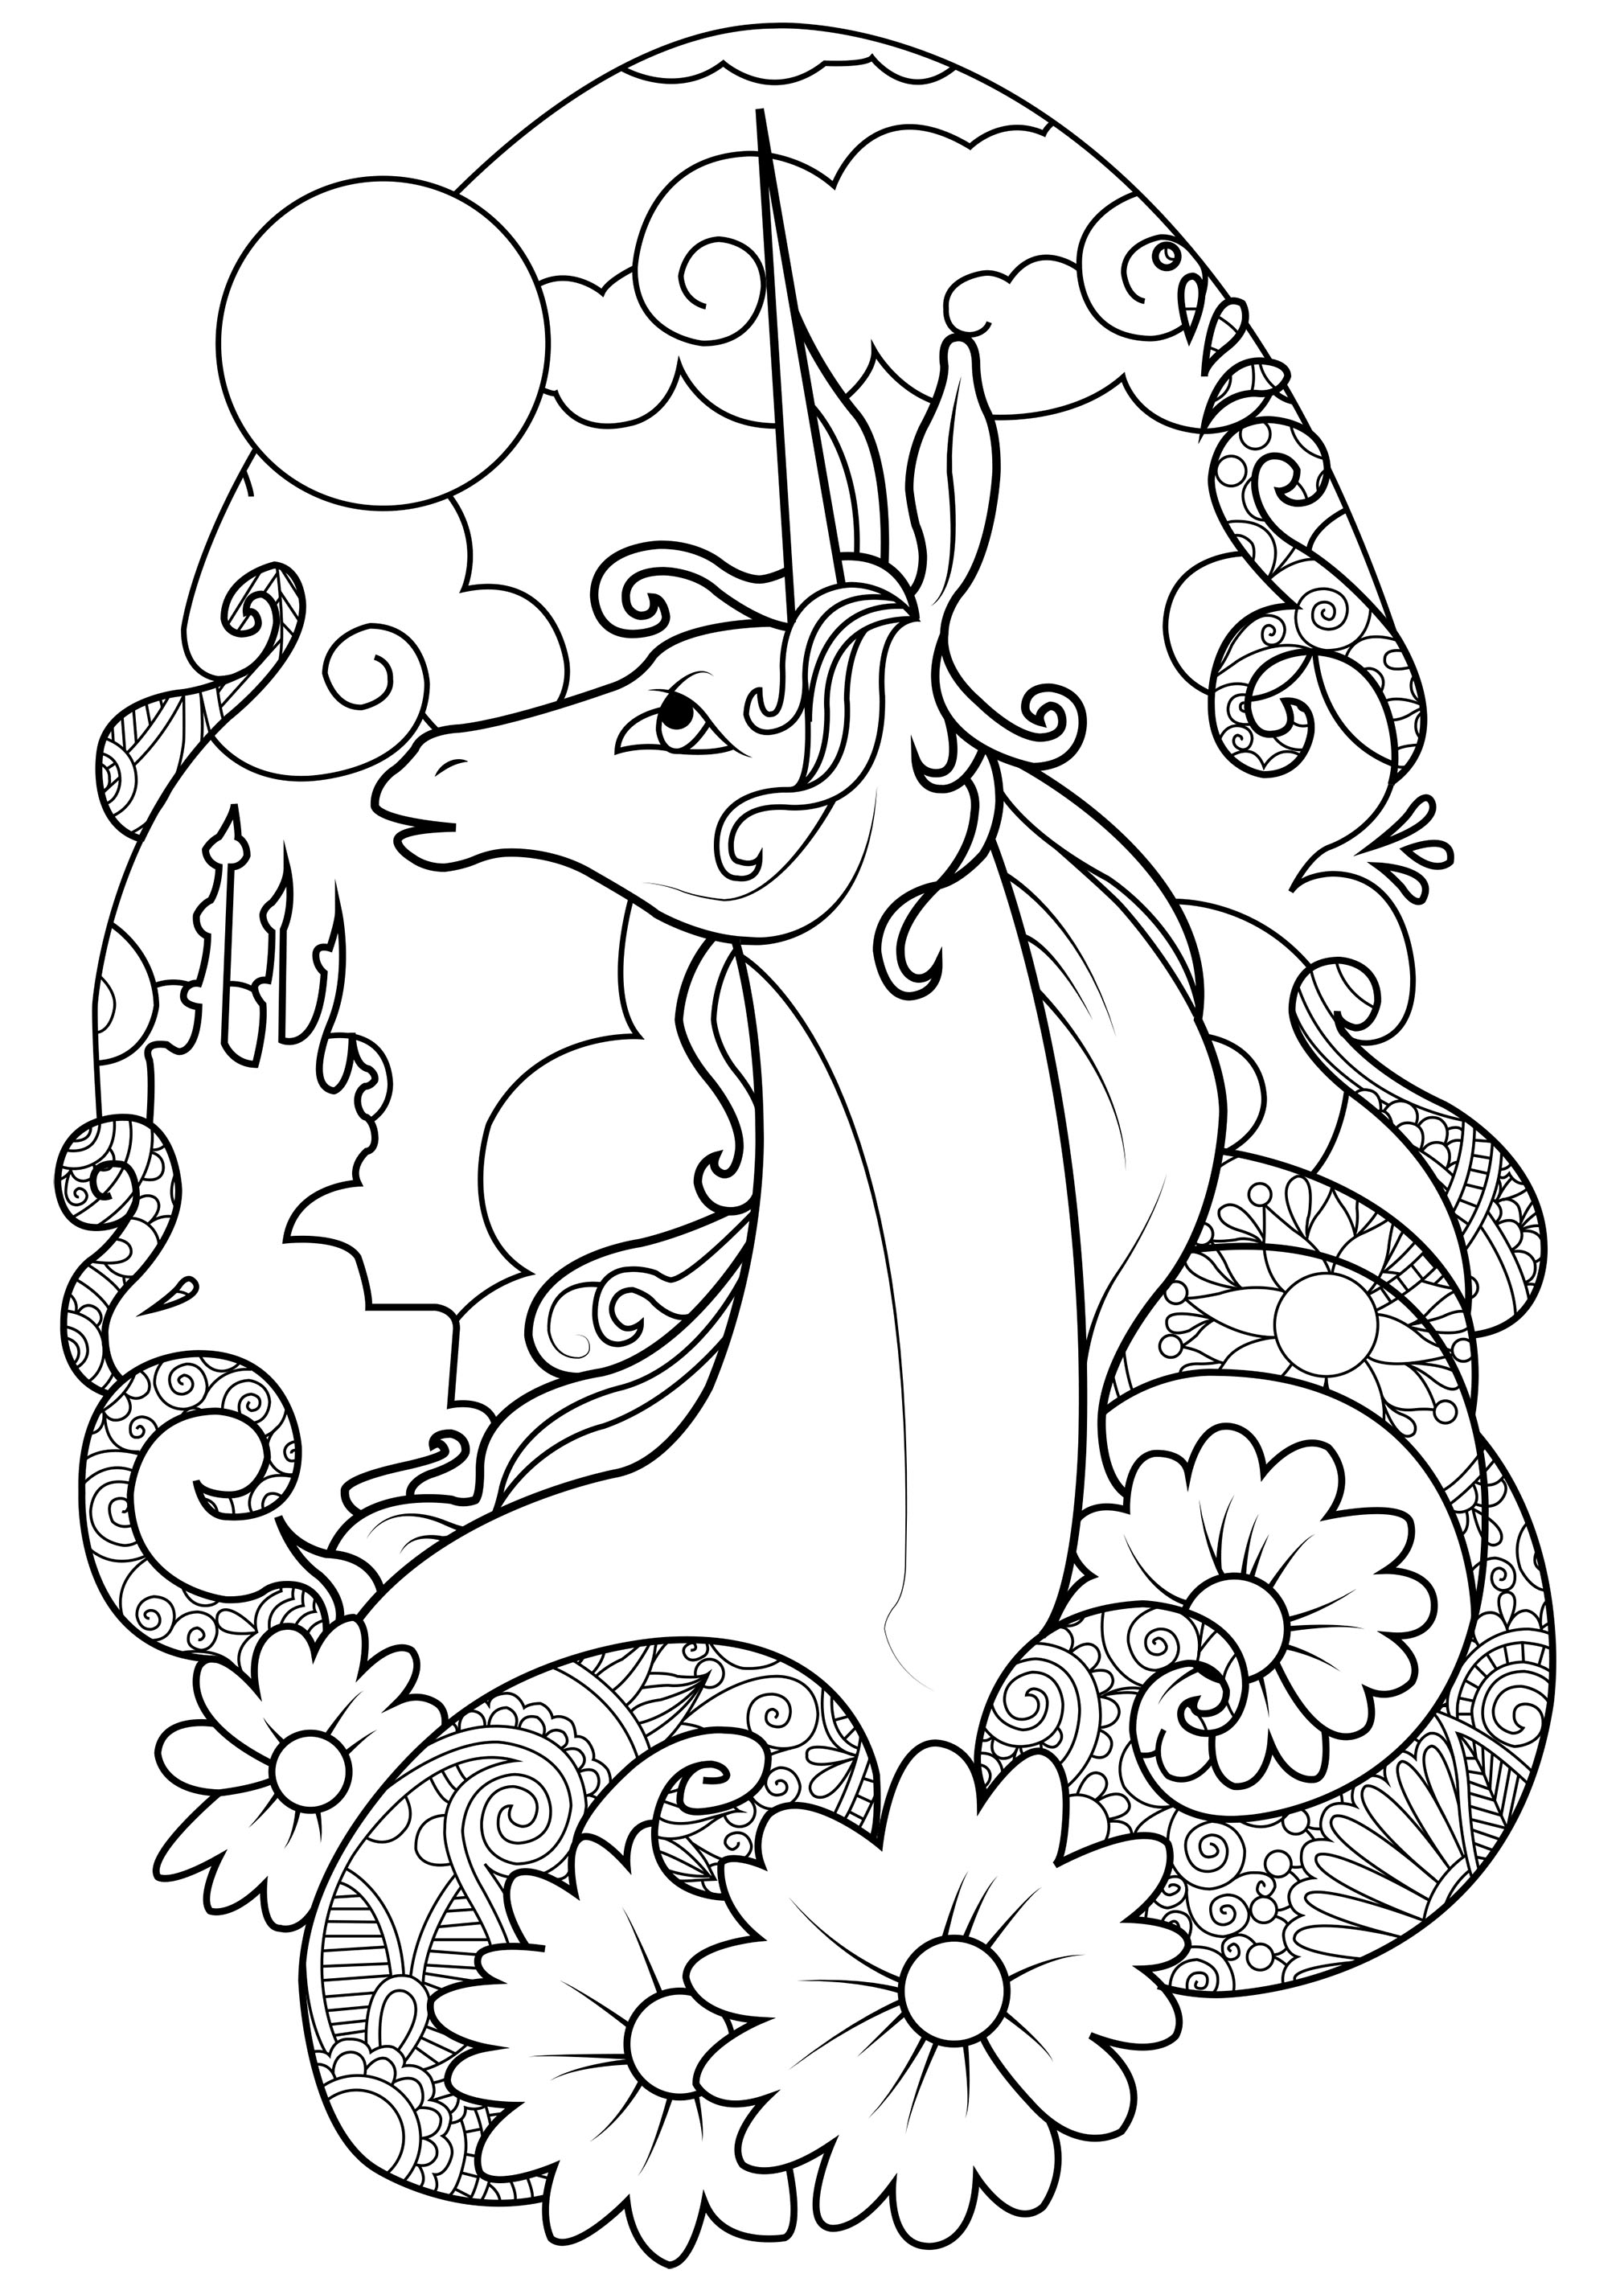 Download Fairy unicorn - Unicorns Adult Coloring Pages